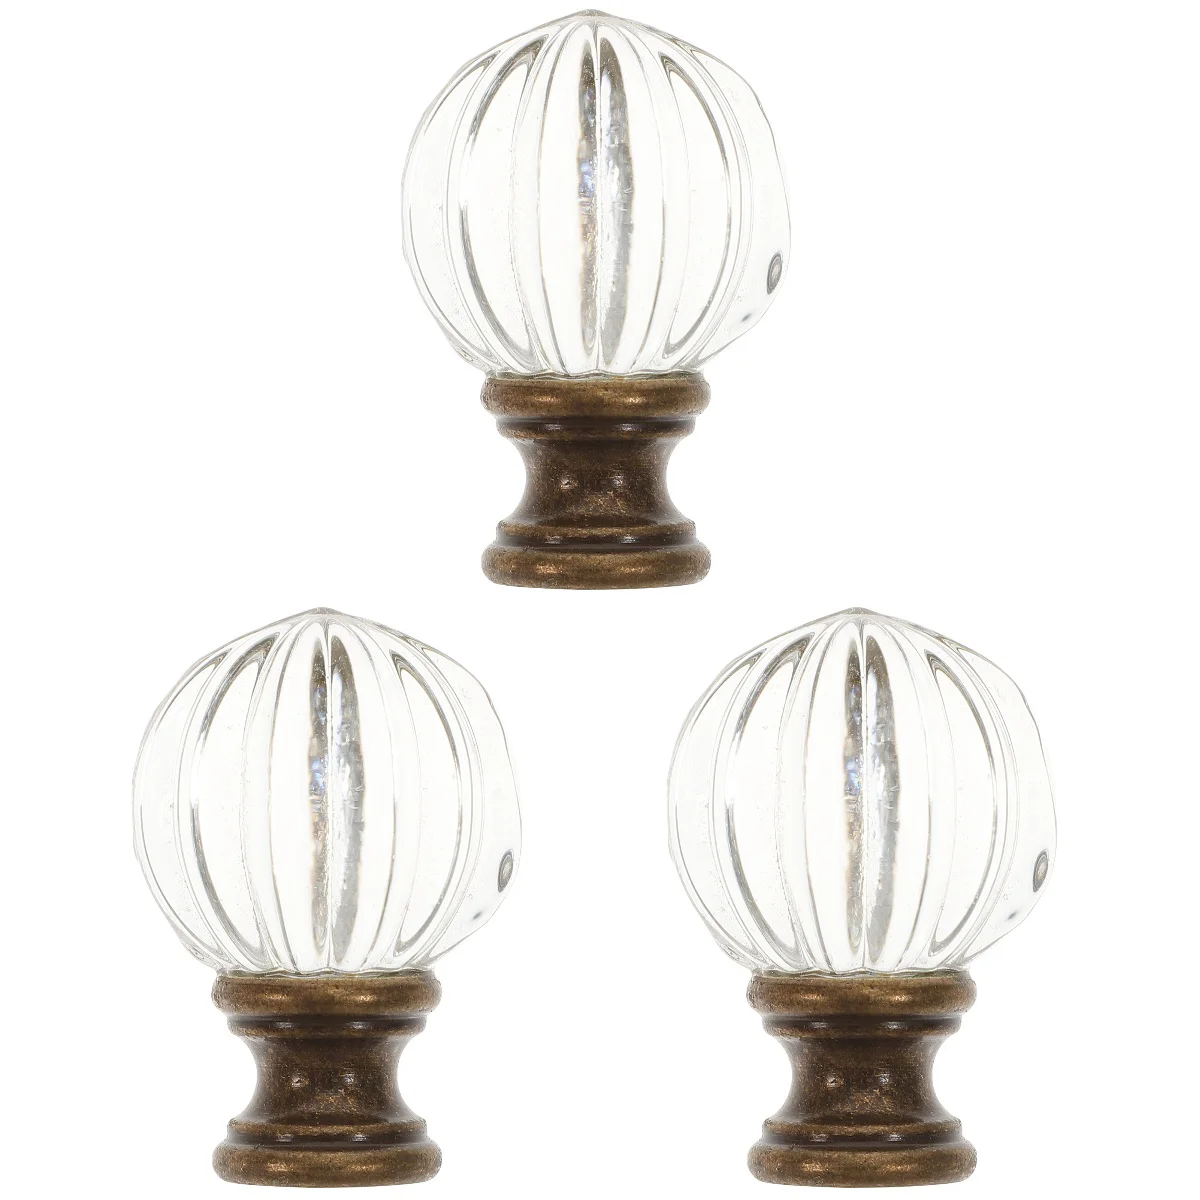 

3 Pack Lamp Top Decoration Light Screw Caps Finials Tapped Shade Table Decorate Glass Knob Lampshade Holder